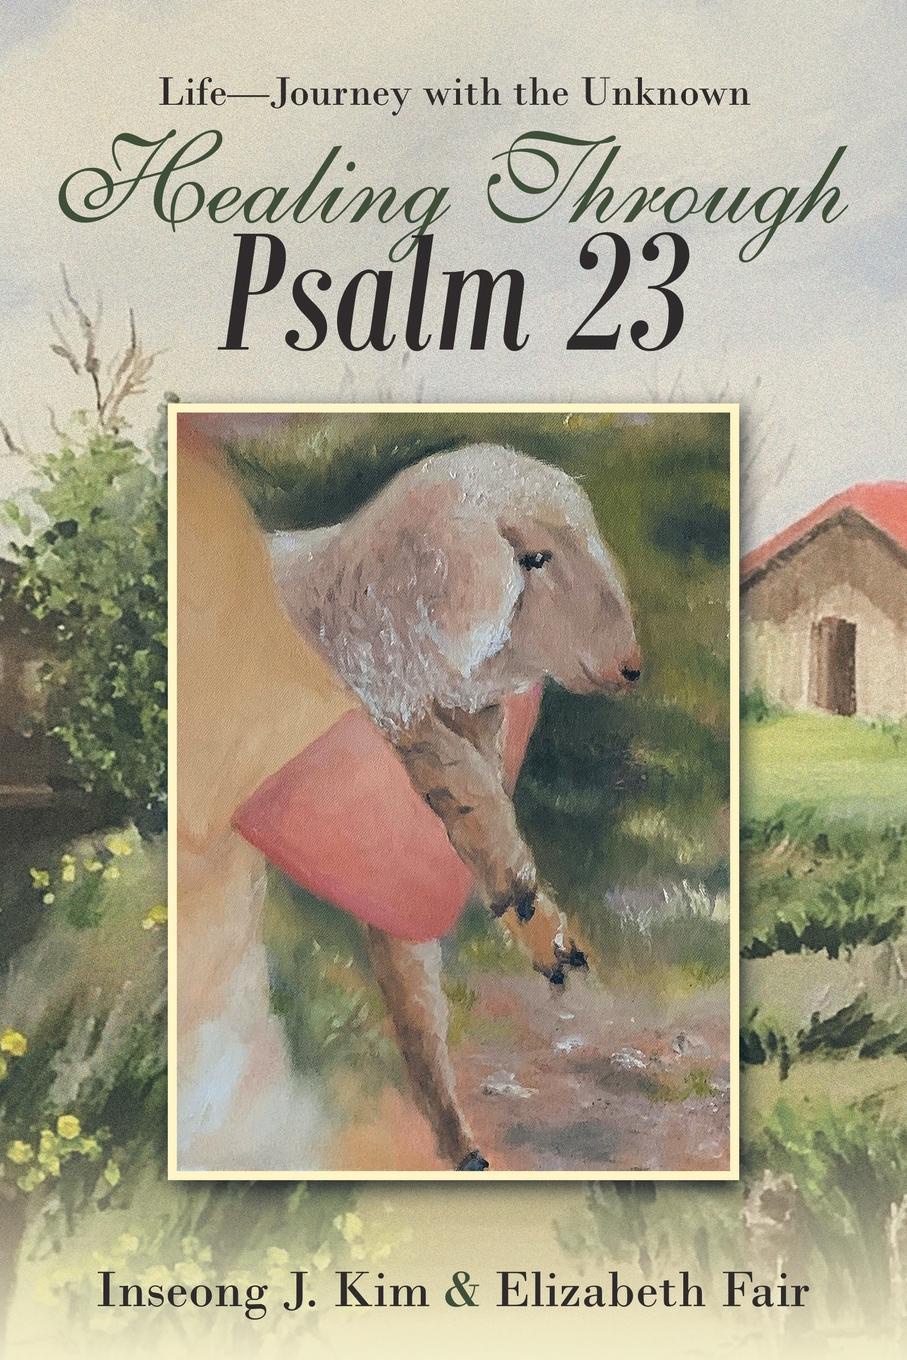 Healing Through Psalm 23. Life-Journey with the Unknown